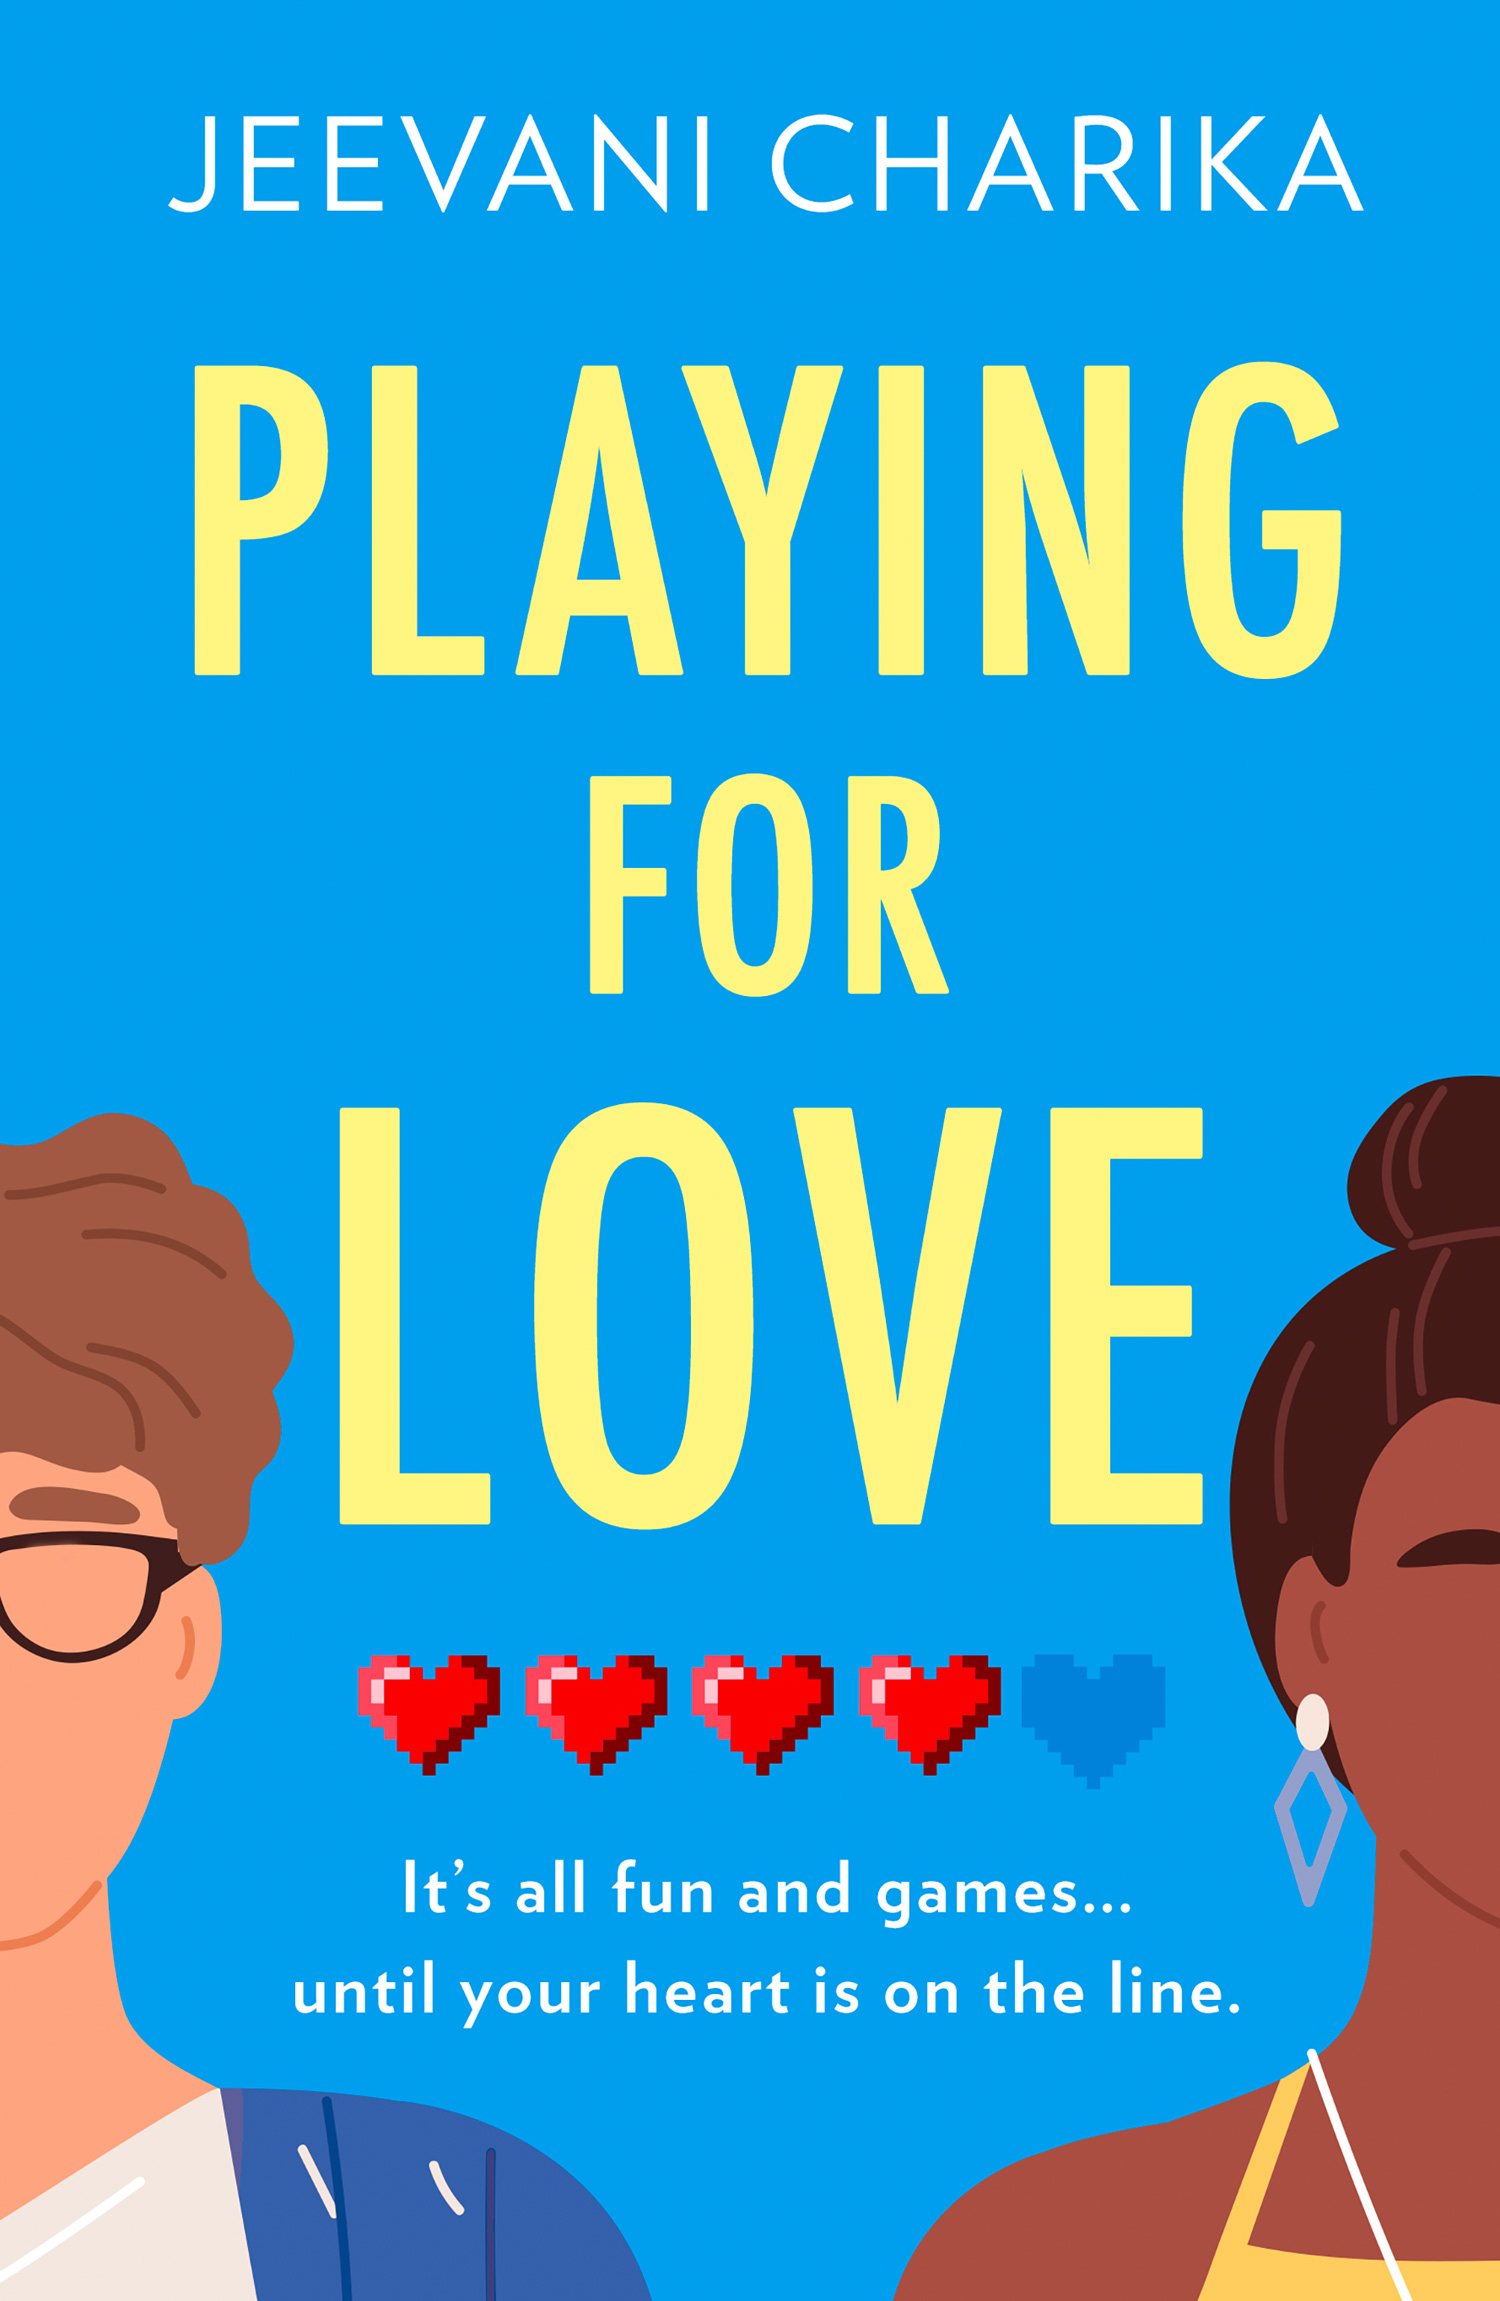 Cover Image of Playing for Love